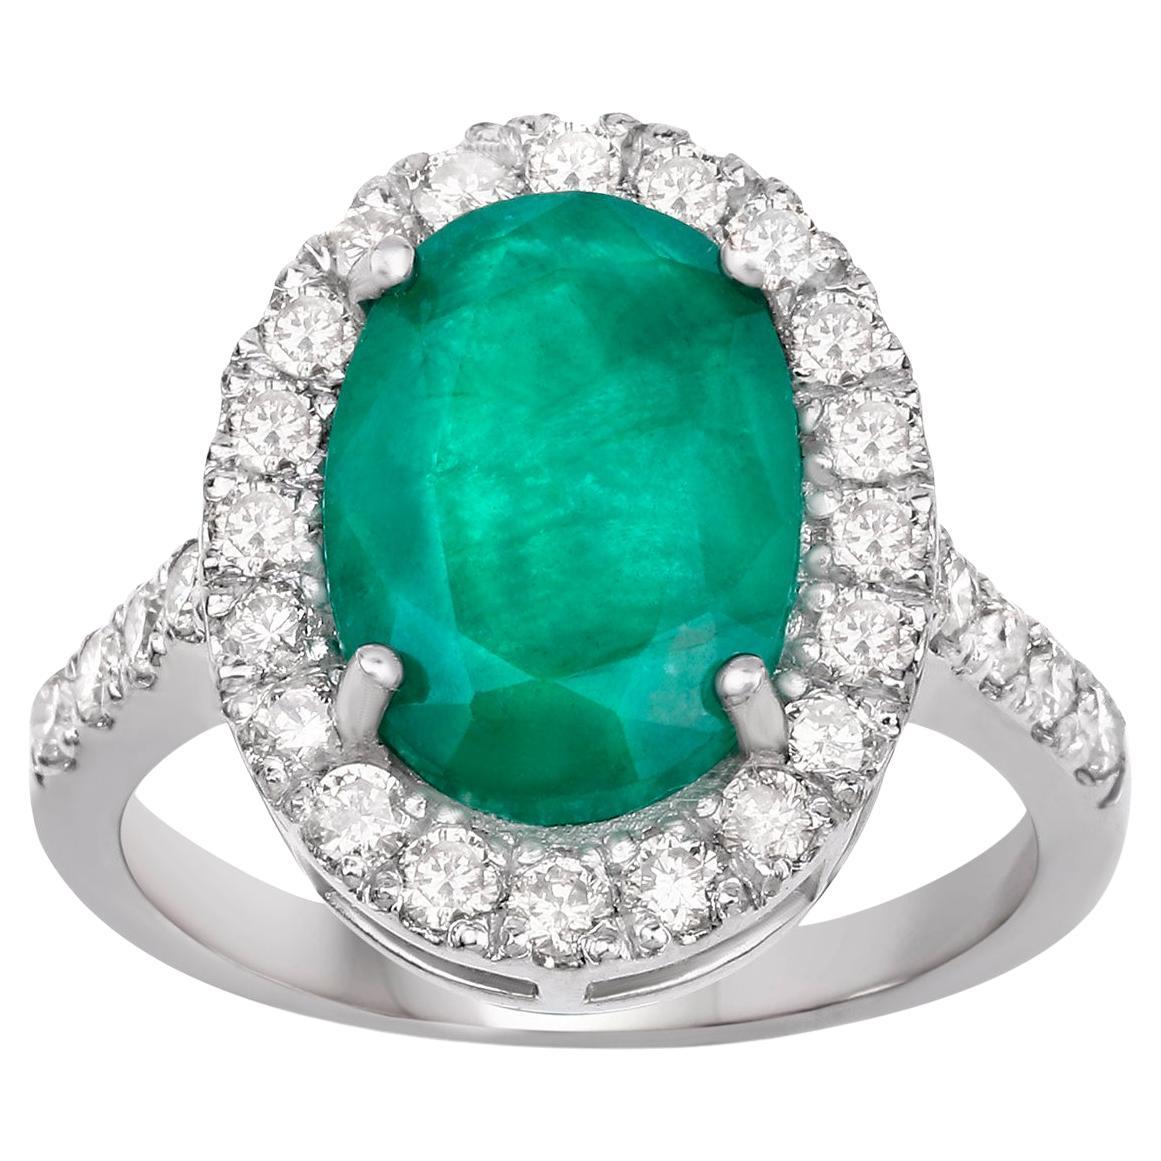 Emerald Ring With Diamonds 5.49 Carats Rhodium Plated Sterling Silver For Sale